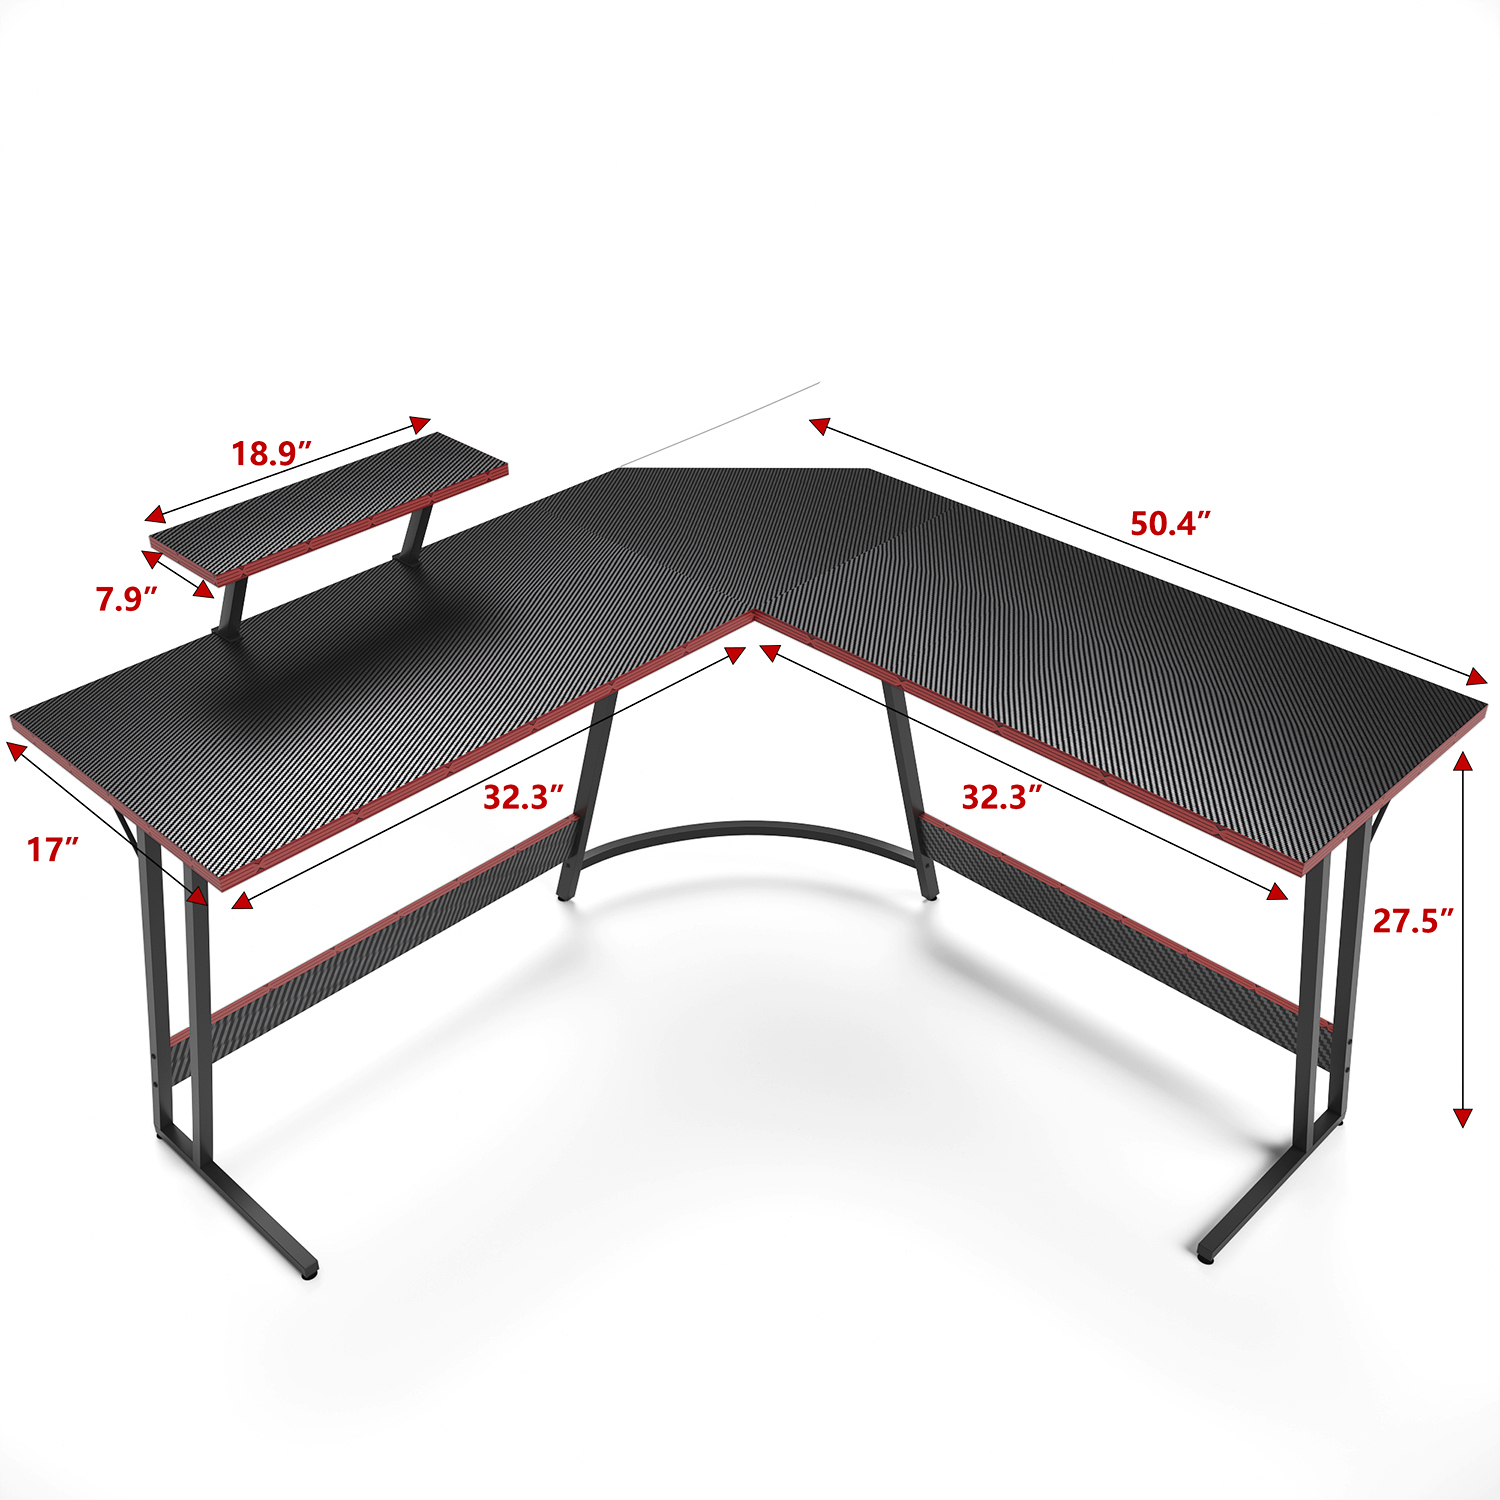 Homall L-Shaped Gaming Desk 51 Inches Corner Office Desk with Removable Monitor Riser, Black - image 4 of 9